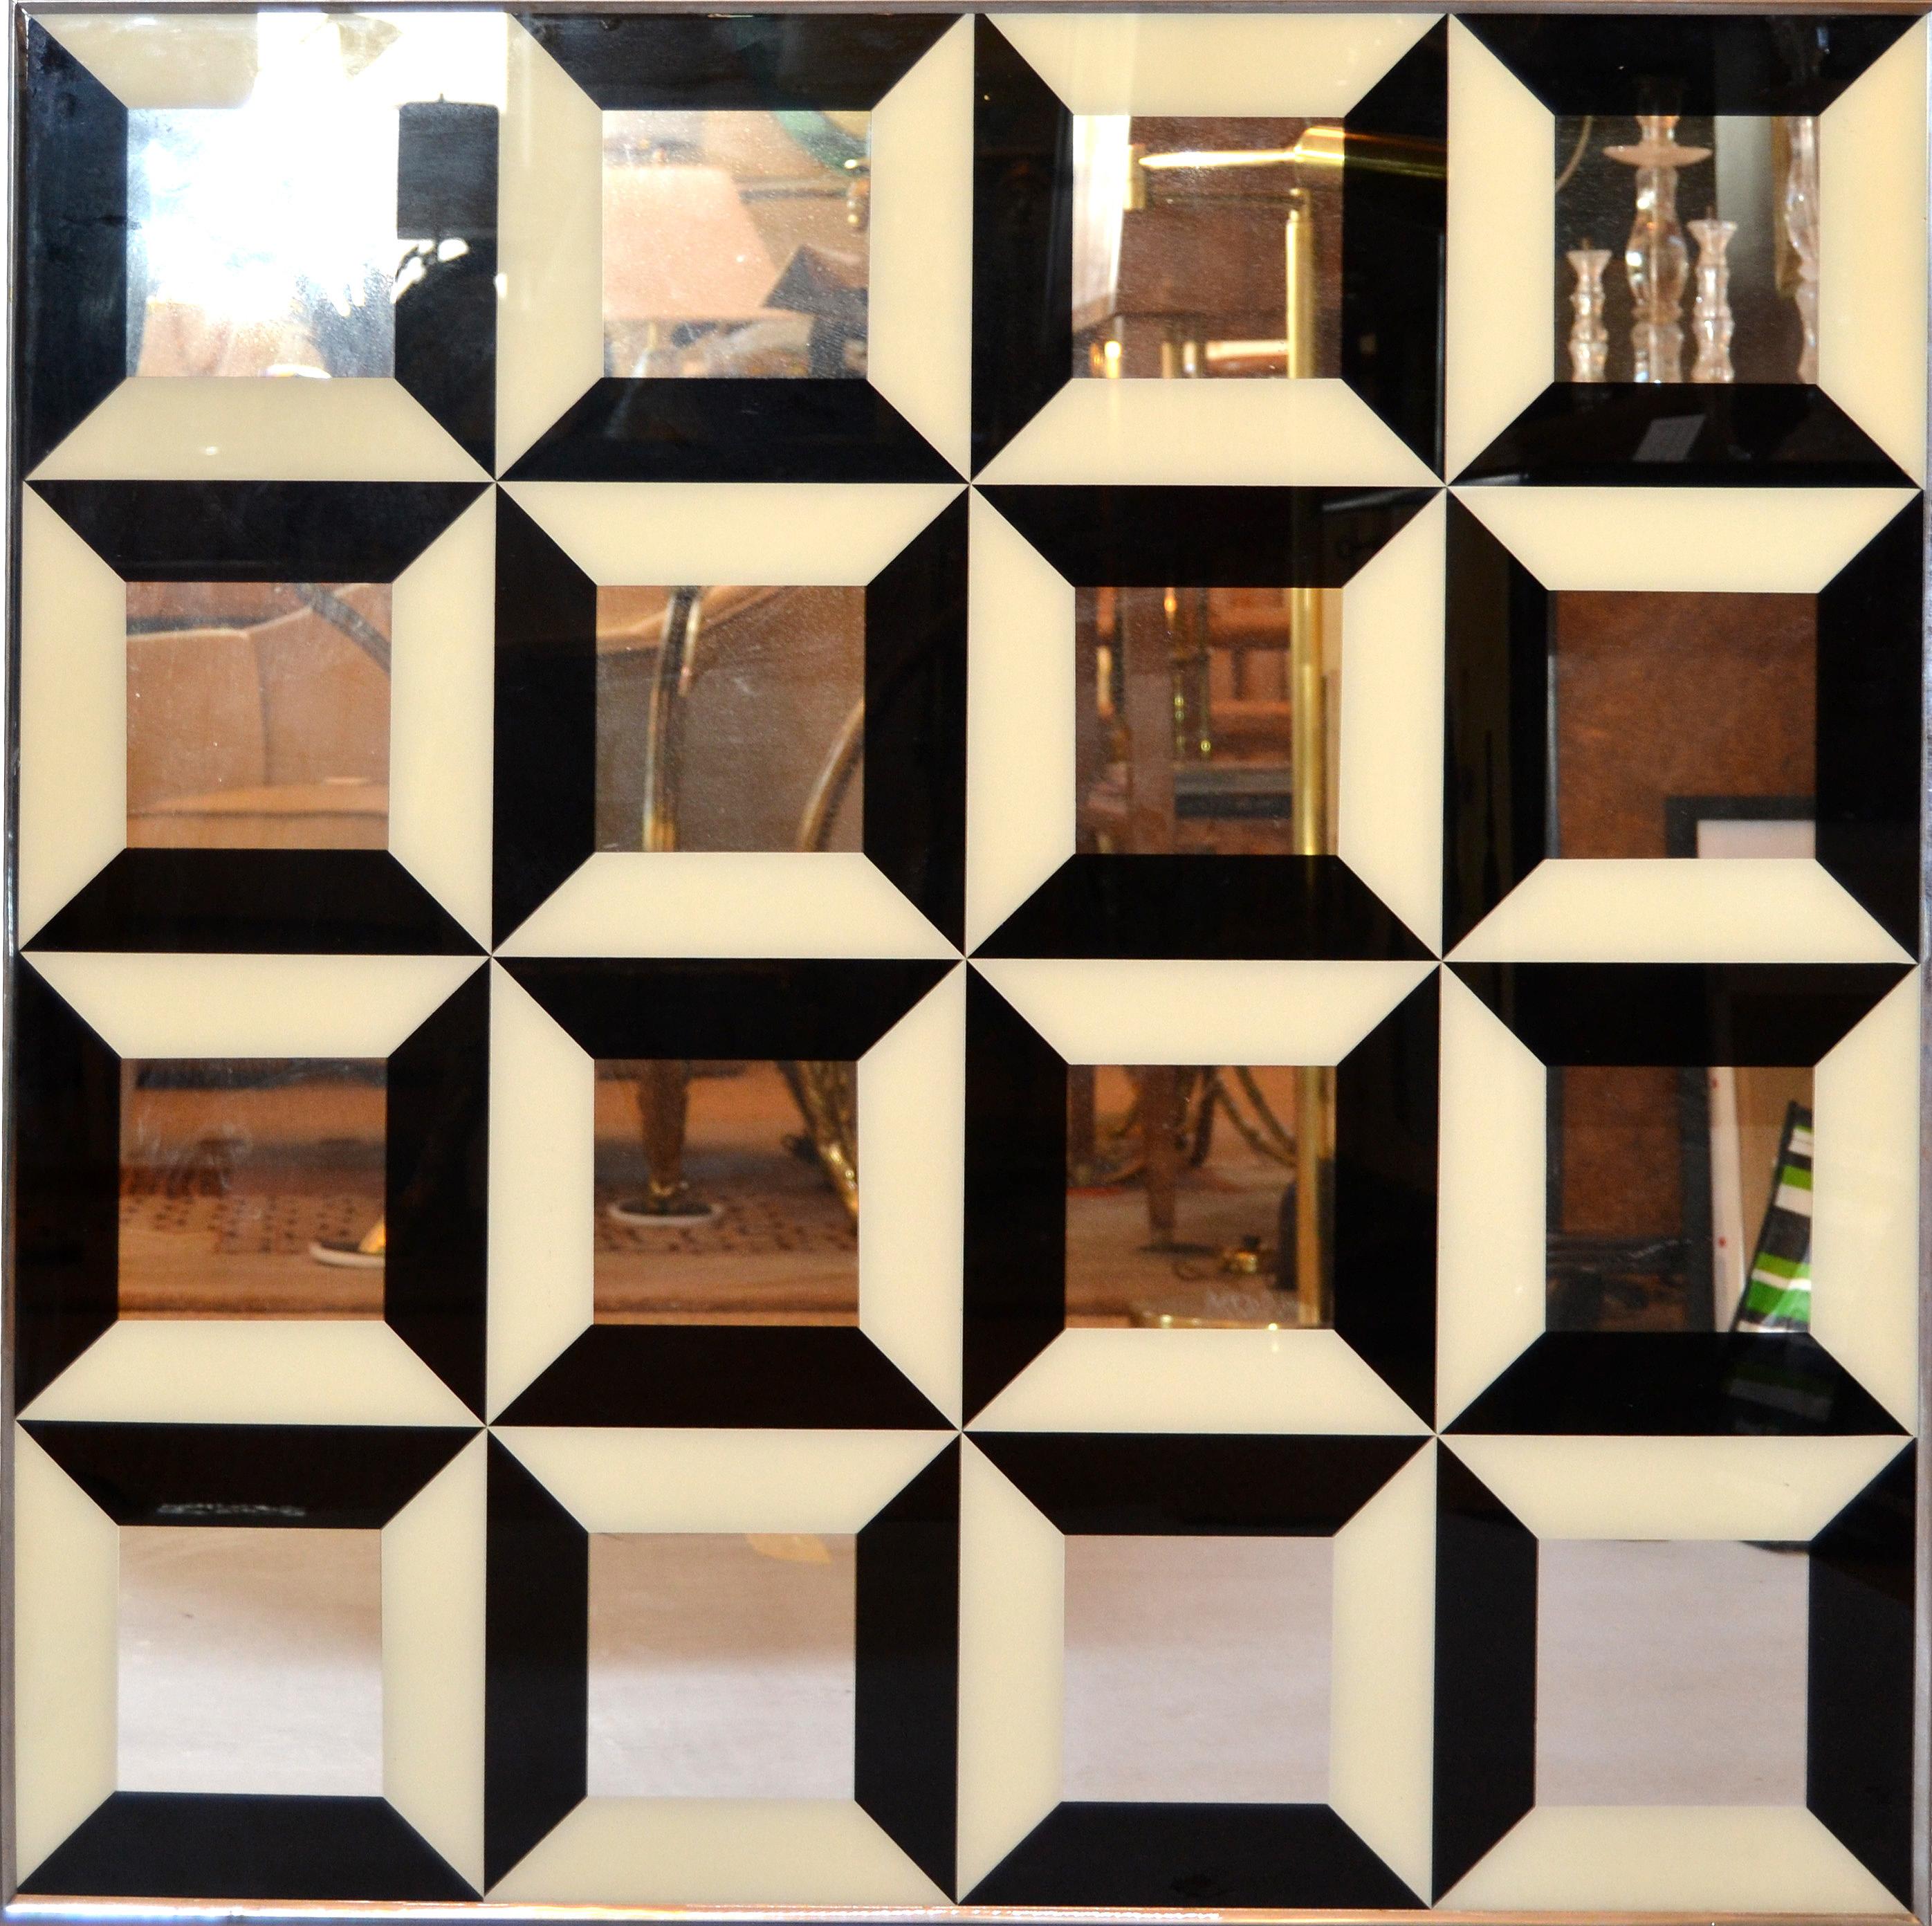 Mid-Century Modern diamond Pop Art mirror in optical illusion.
Black and white reverse painted design patterns on the mirror create a 3D optical illusion making it look like raised squares.
This pattern is influenced by Verner Panton.
Wired to be